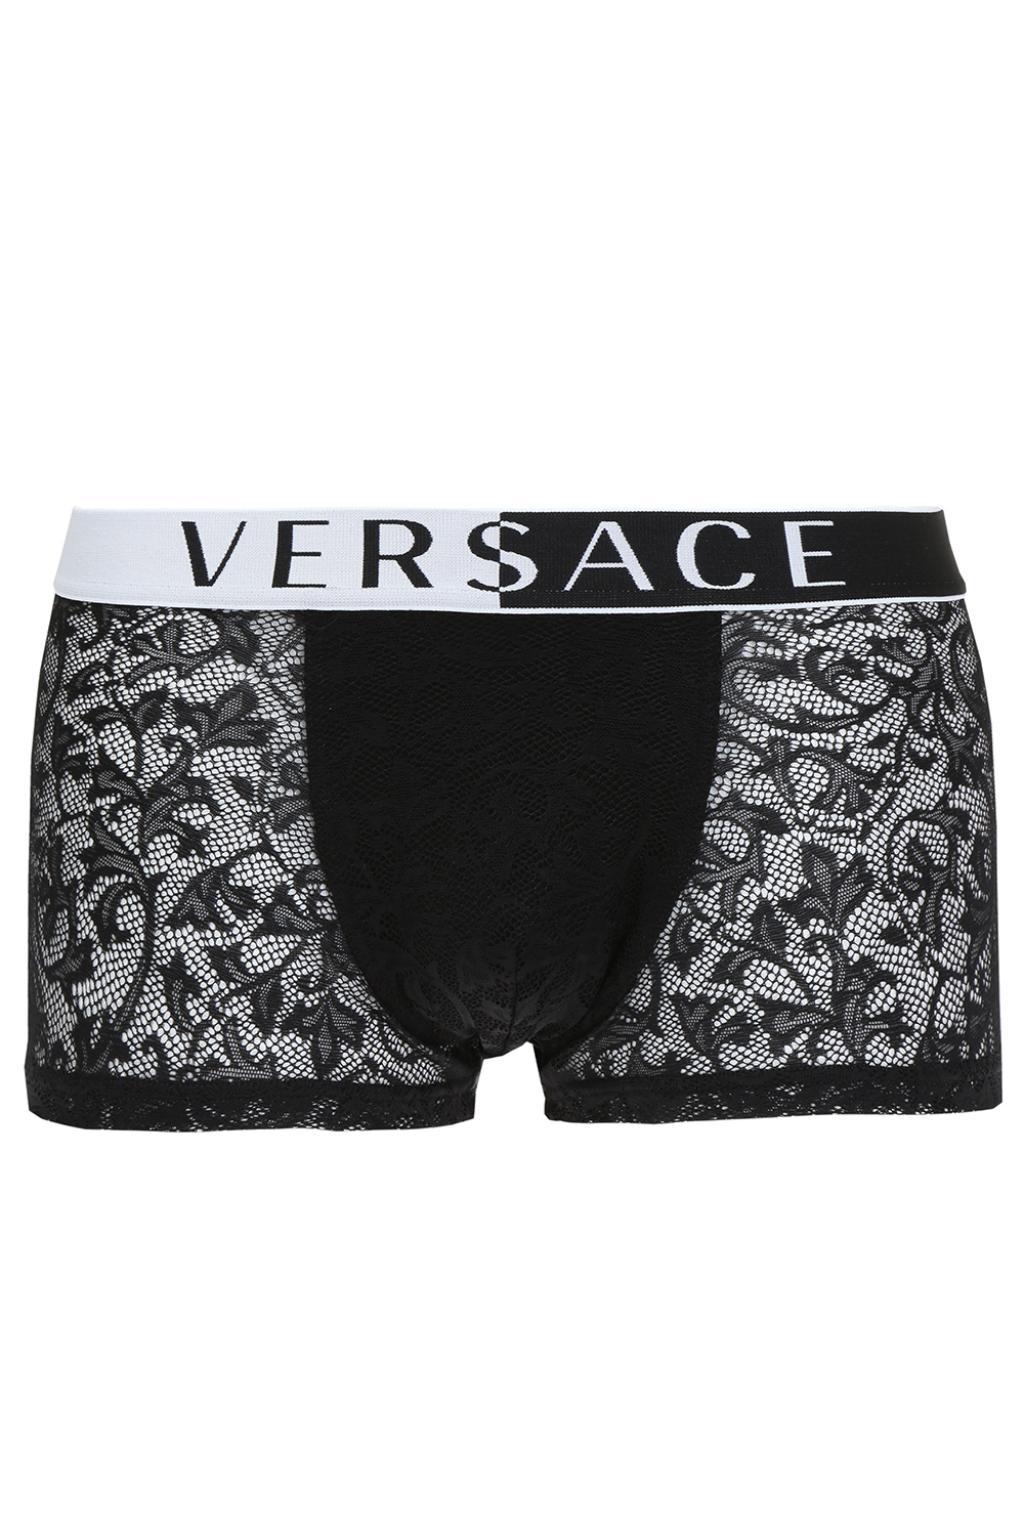 versace lace boxers, OFF 74%,Buy!